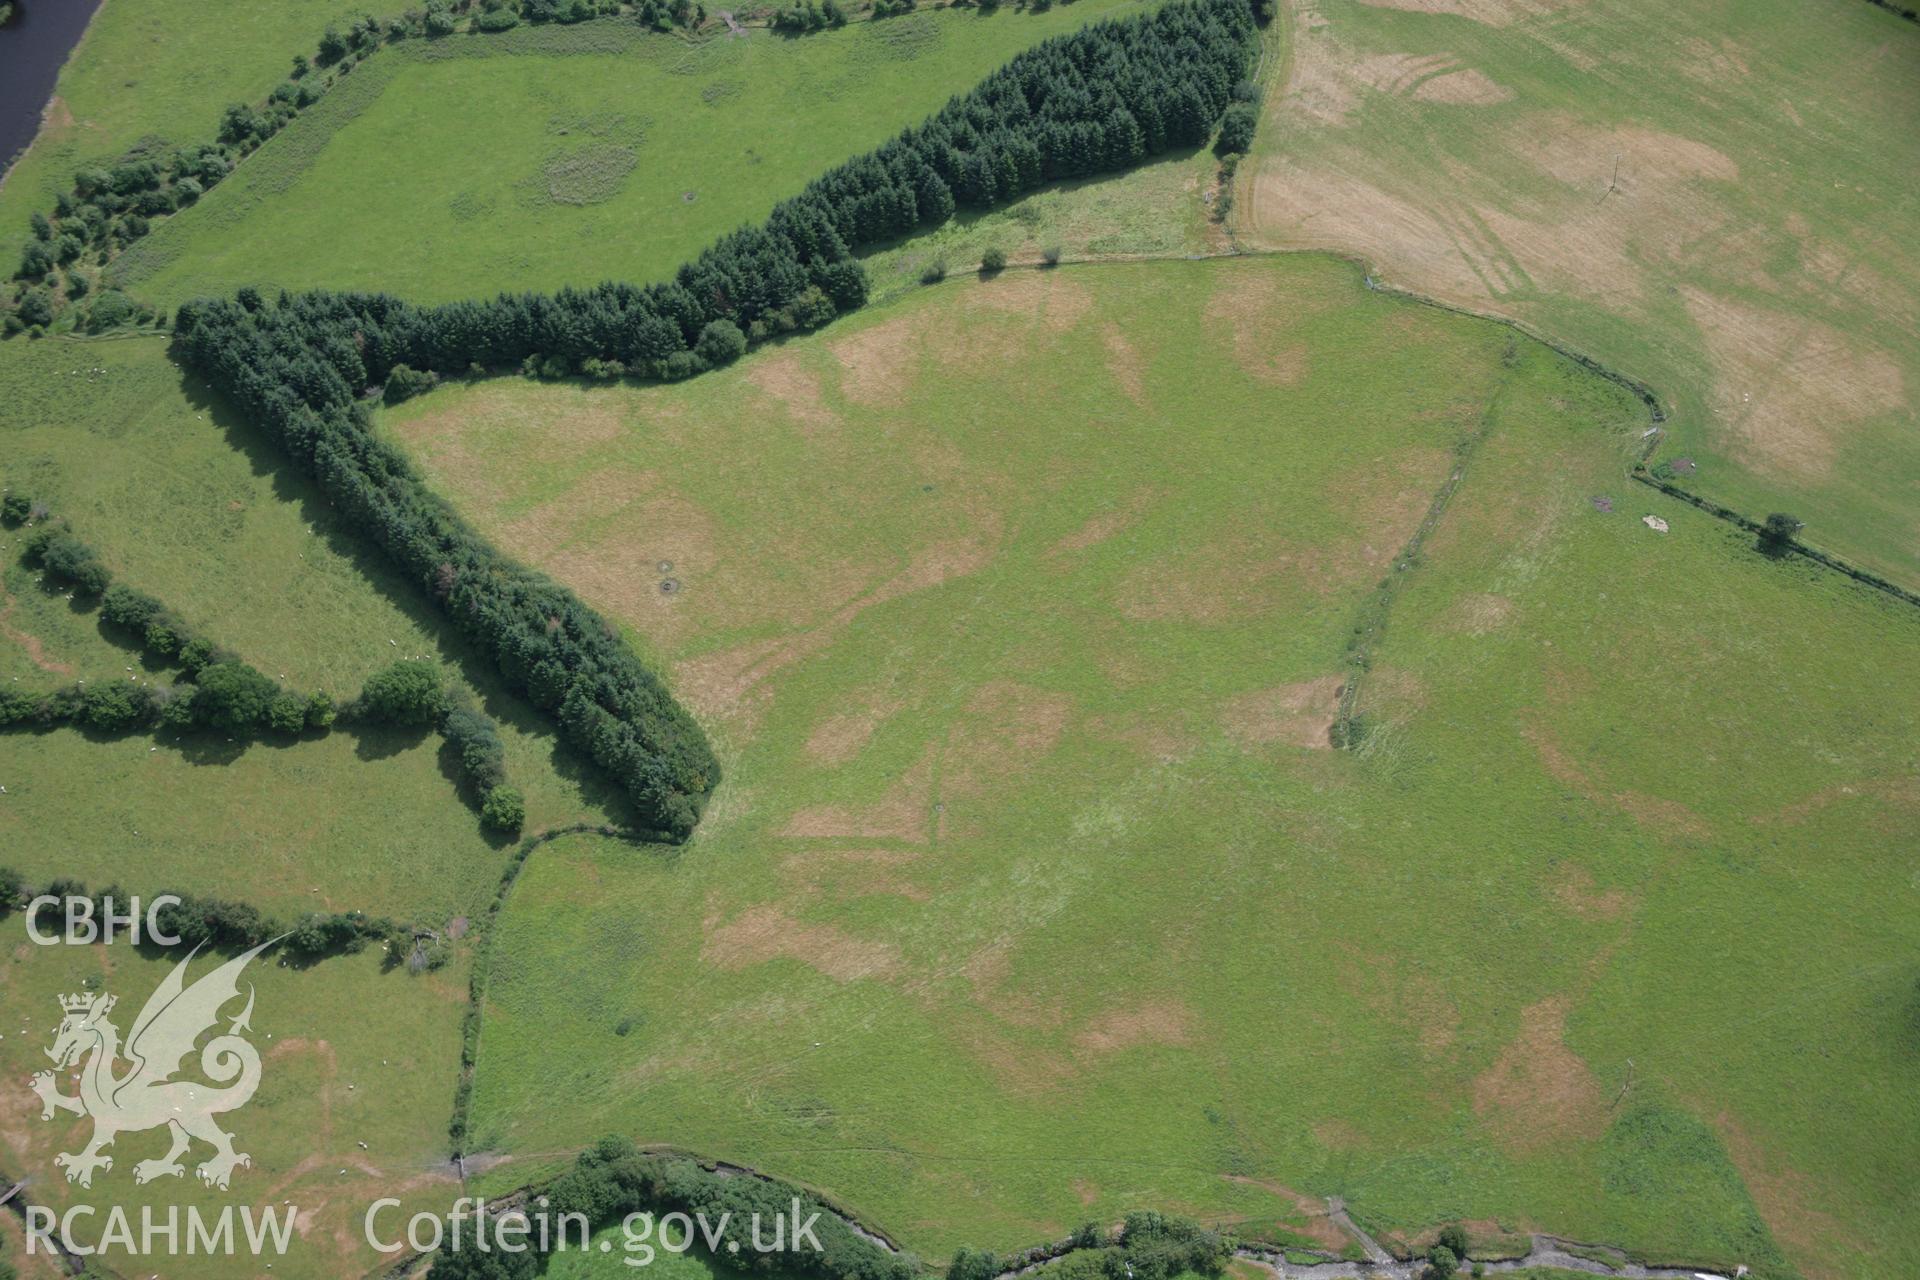 RCAHMW colour oblique aerial photograph of Llanfor Roman Military Complex visible in cropmarks, viewed from the north. Taken on 31 July 2006 by Toby Driver.